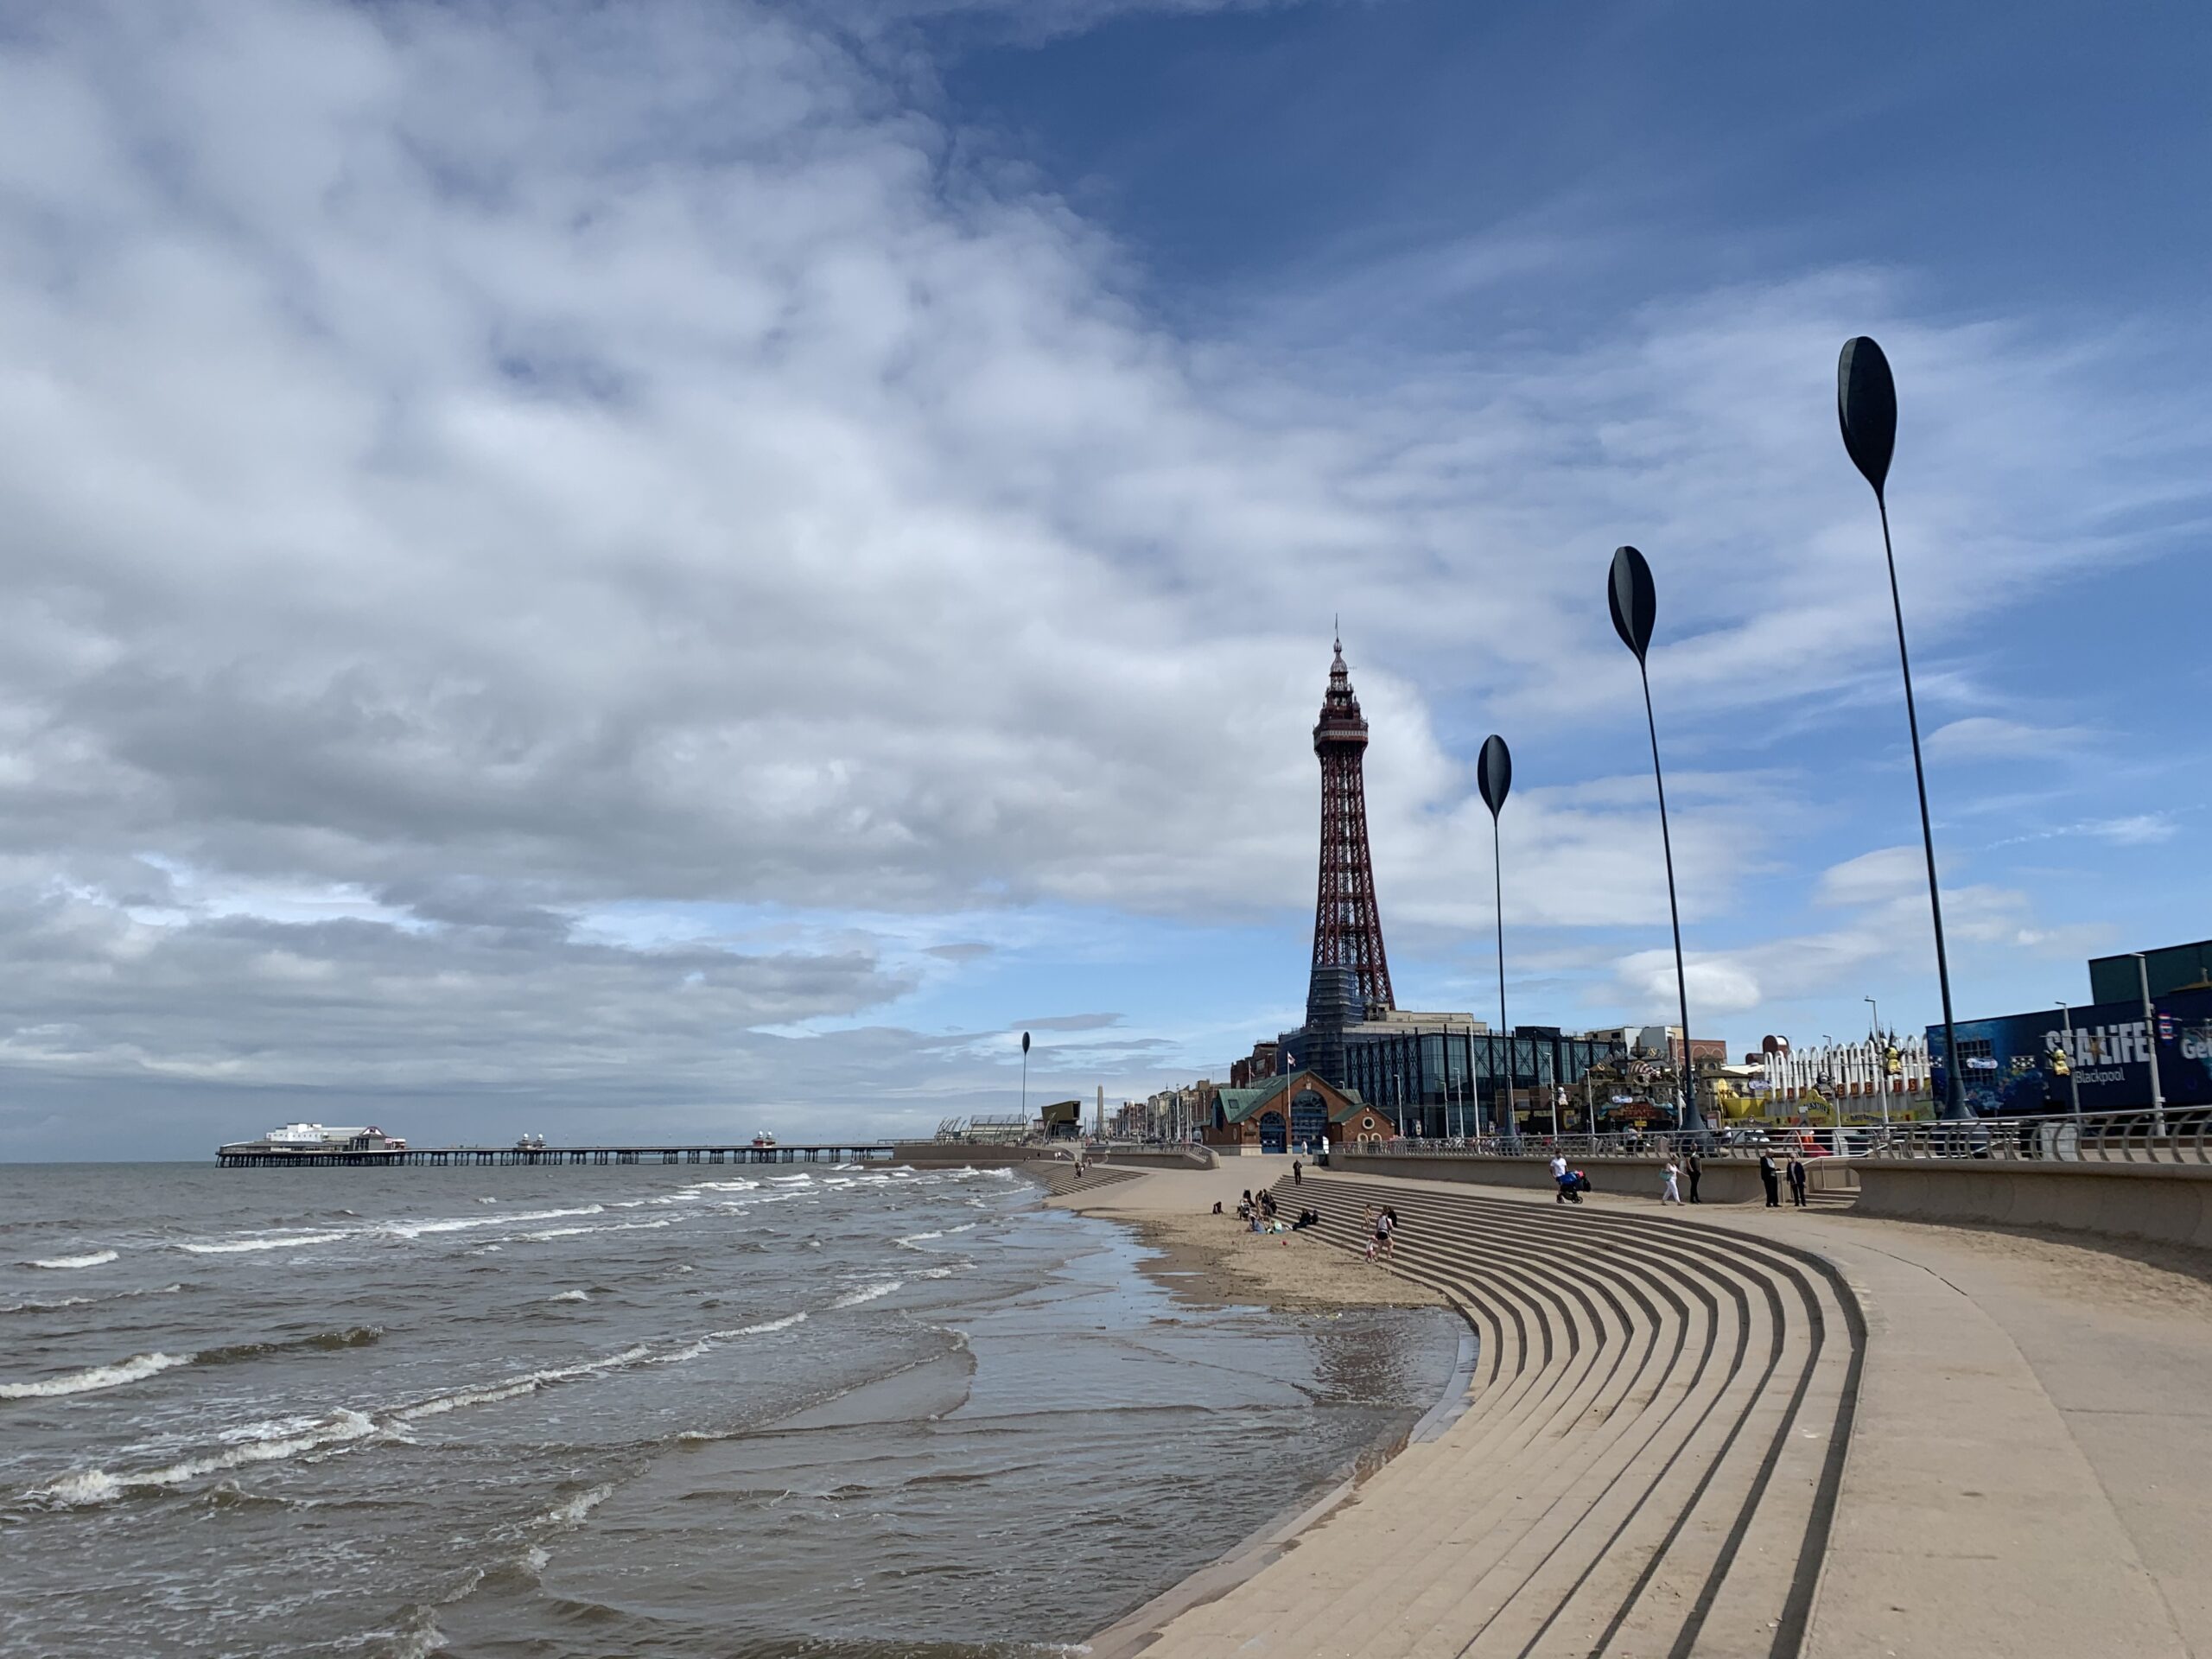 A year on Blackpool seafront